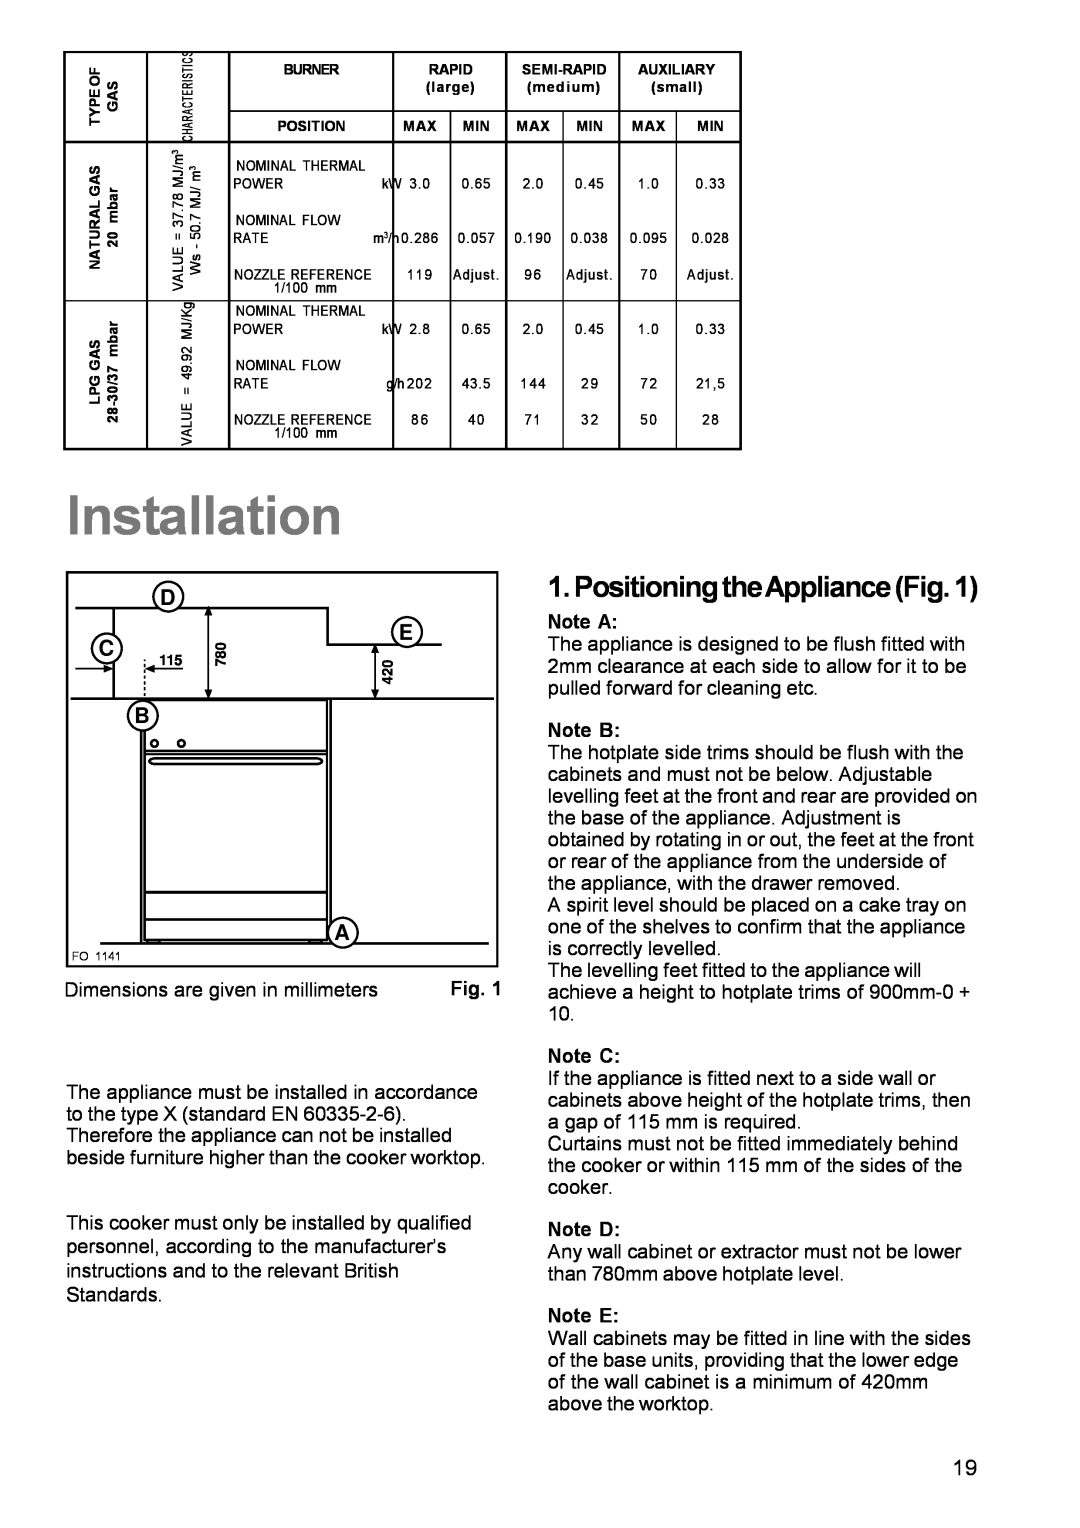 Electrolux EK 5731 manual PositioningtheApplianceFig.1, Installation, Dimensions are given in millimeters 